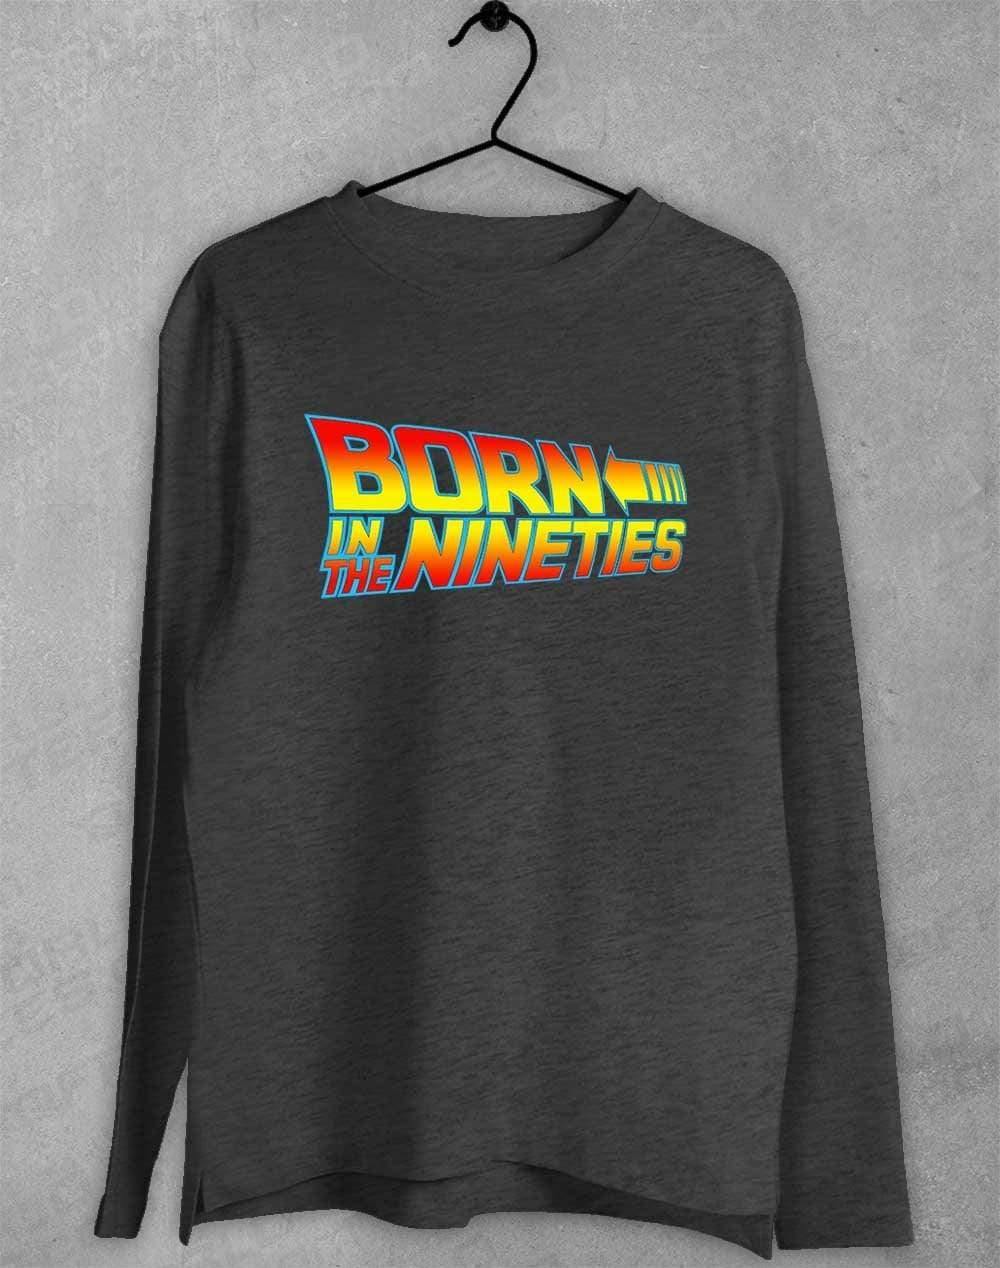 Born in the... (CHOOSE YOUR DECADE!) Long Sleeve T-Shirt 1990s - Dark Heather / S  - Off World Tees